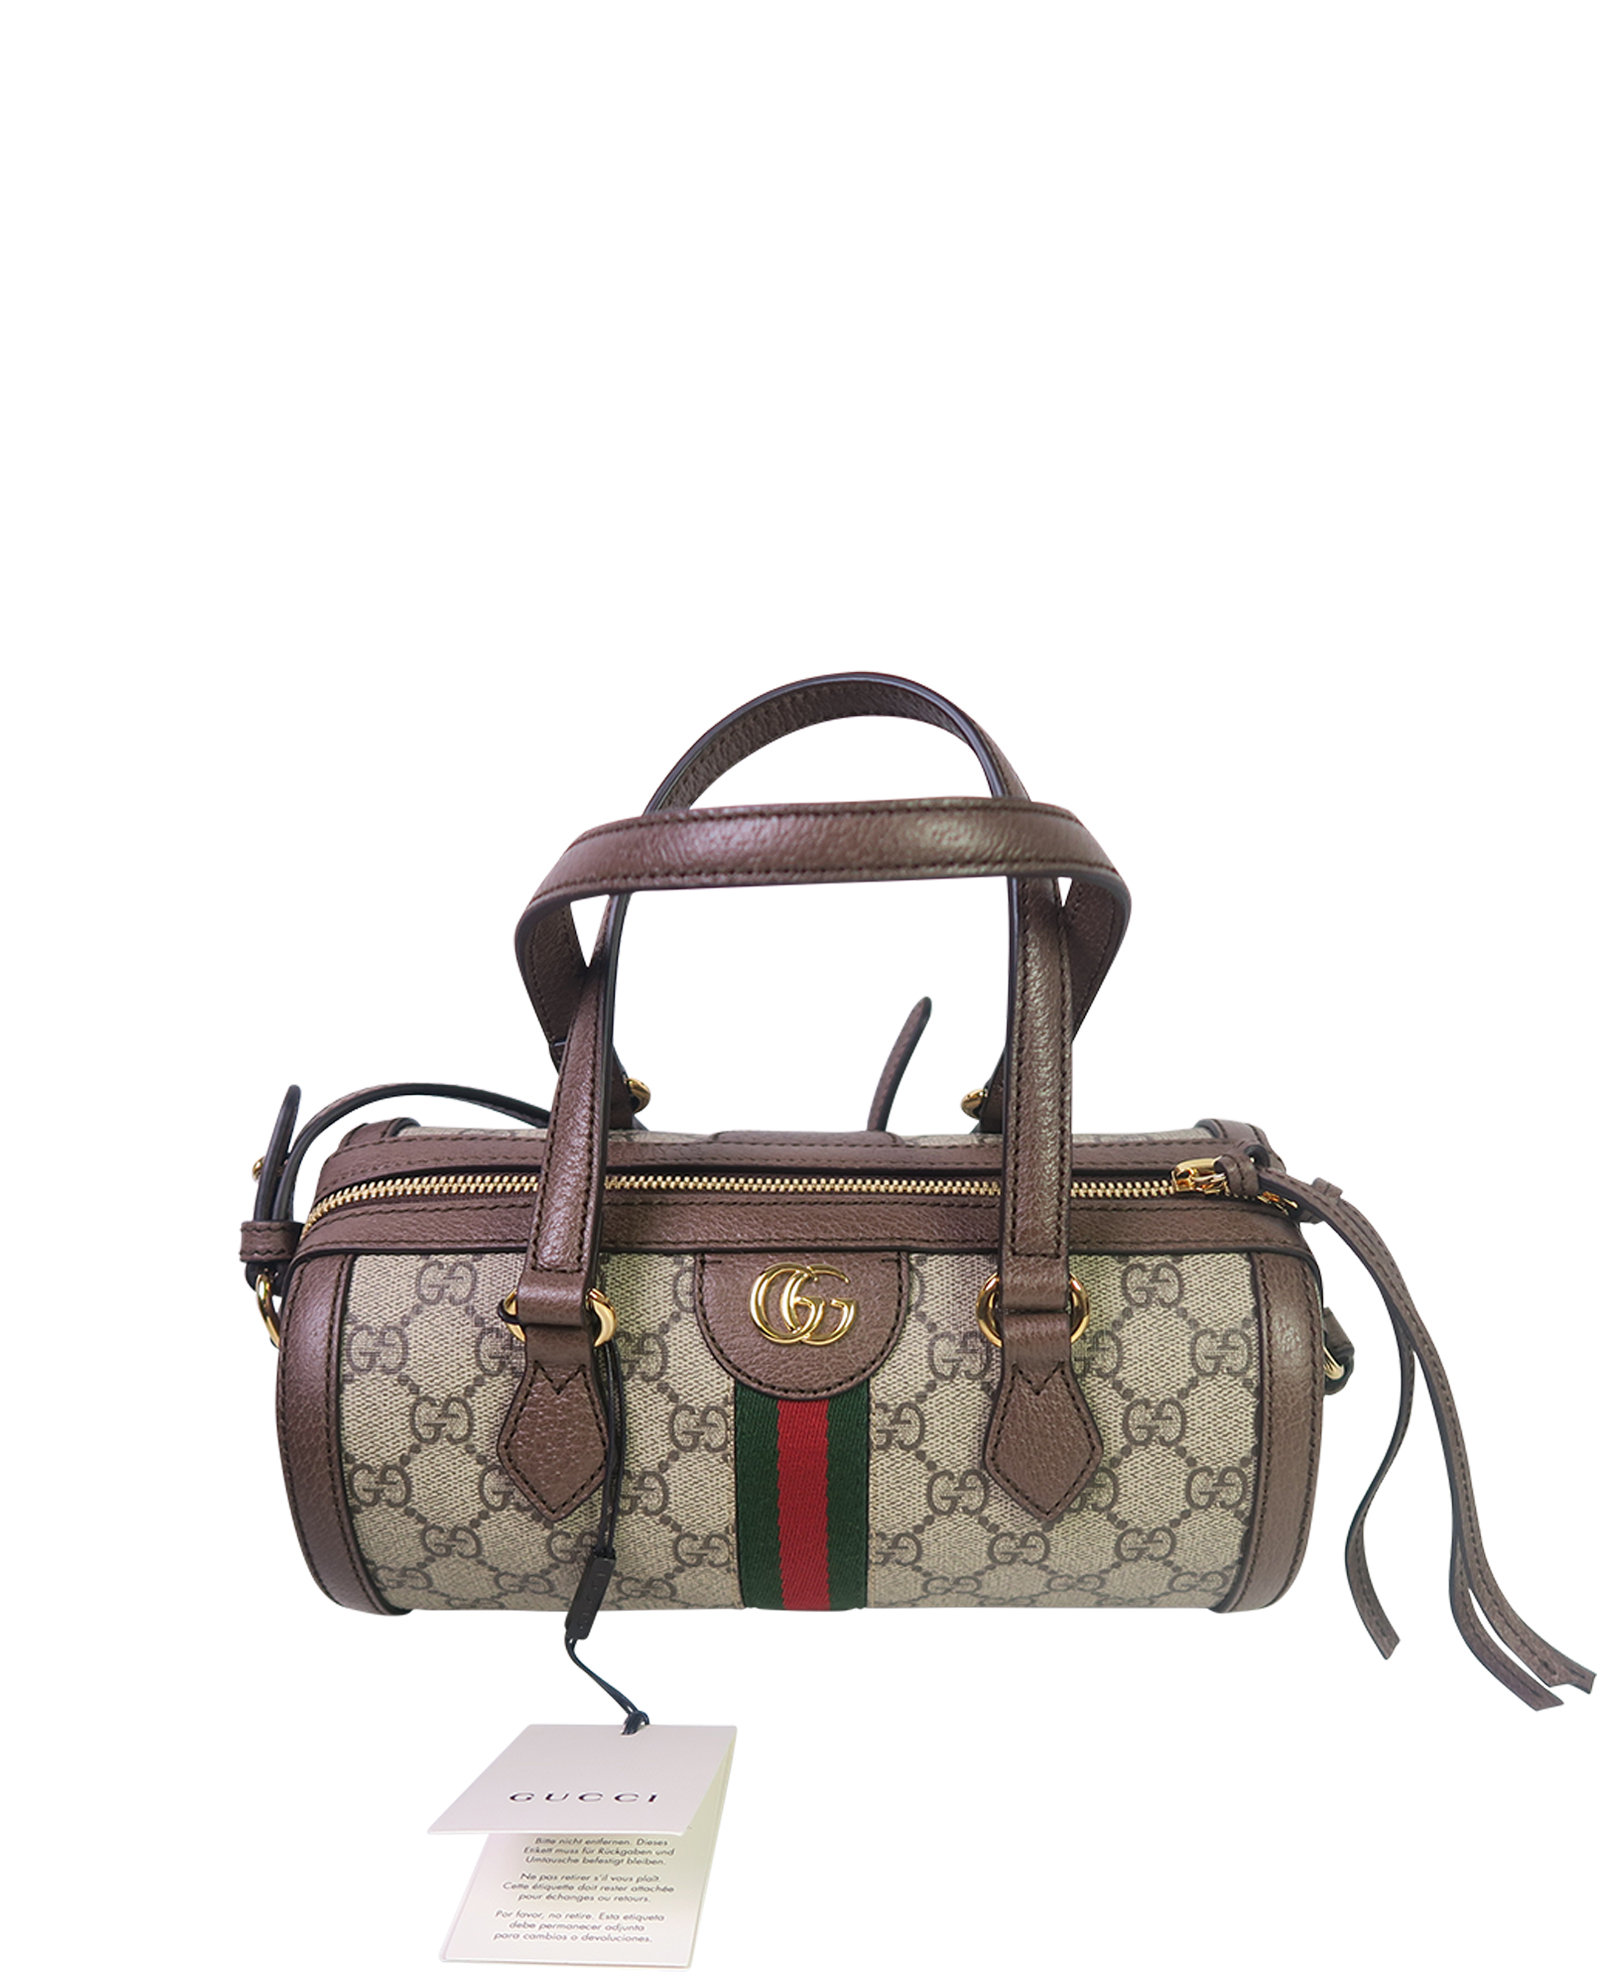 Ophidia boston patent leather handbag Gucci Brown in Patent leather -  25926229